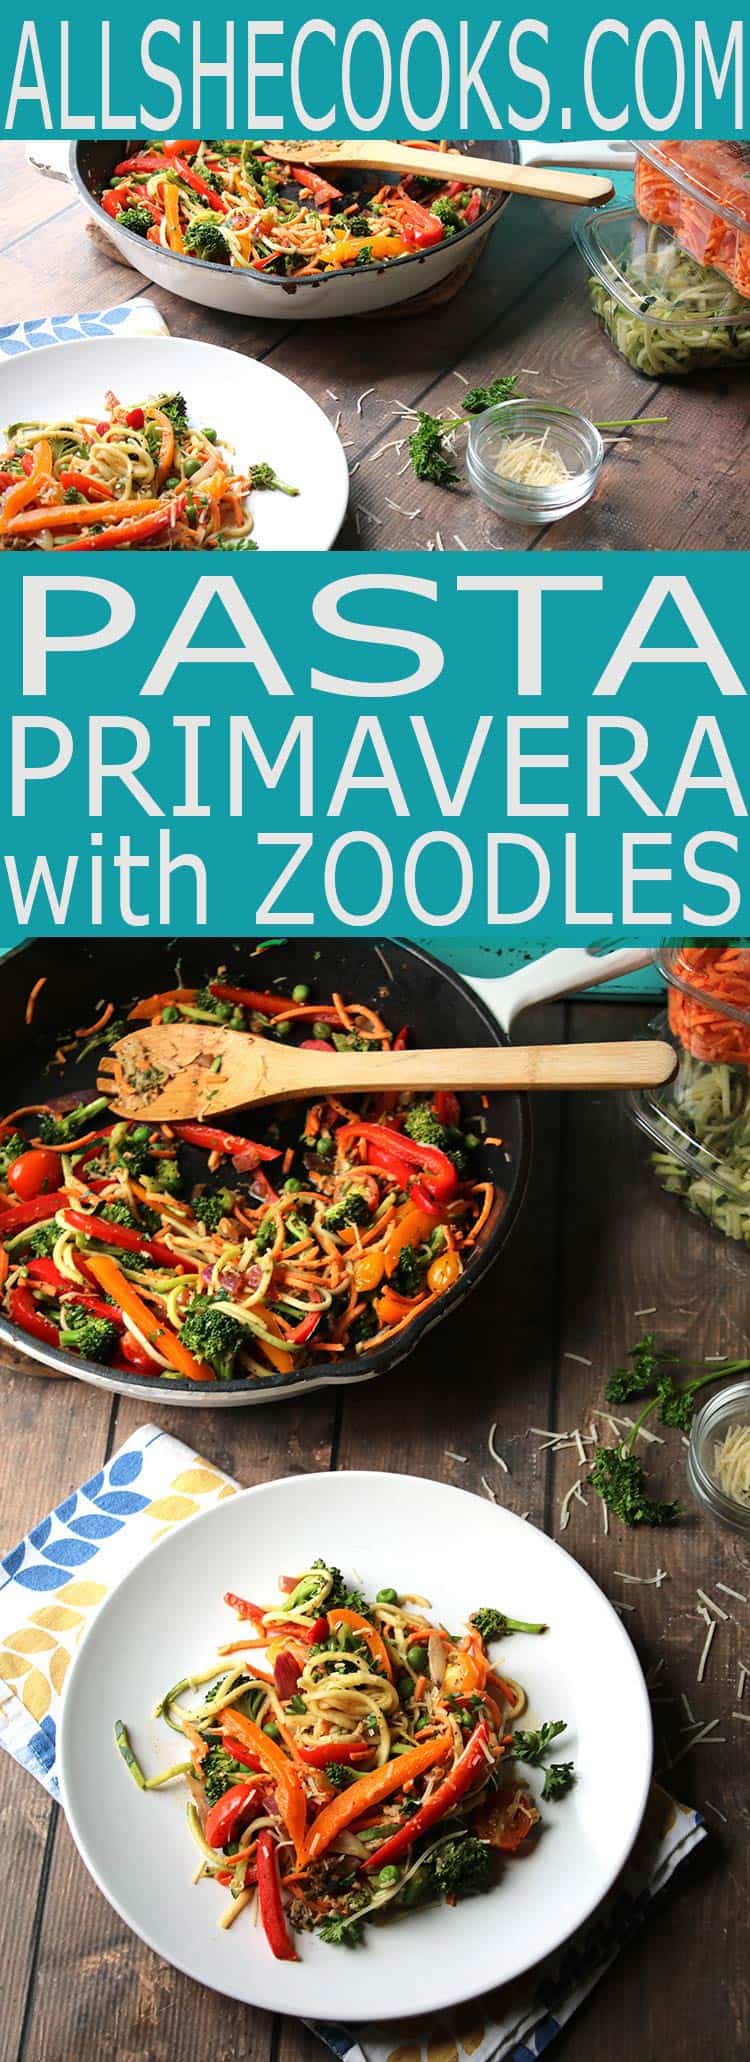 Enjoy Pasta Primavera with Zoodles, a healthy way to reduce calories and eat a gluten-free pasta dish.